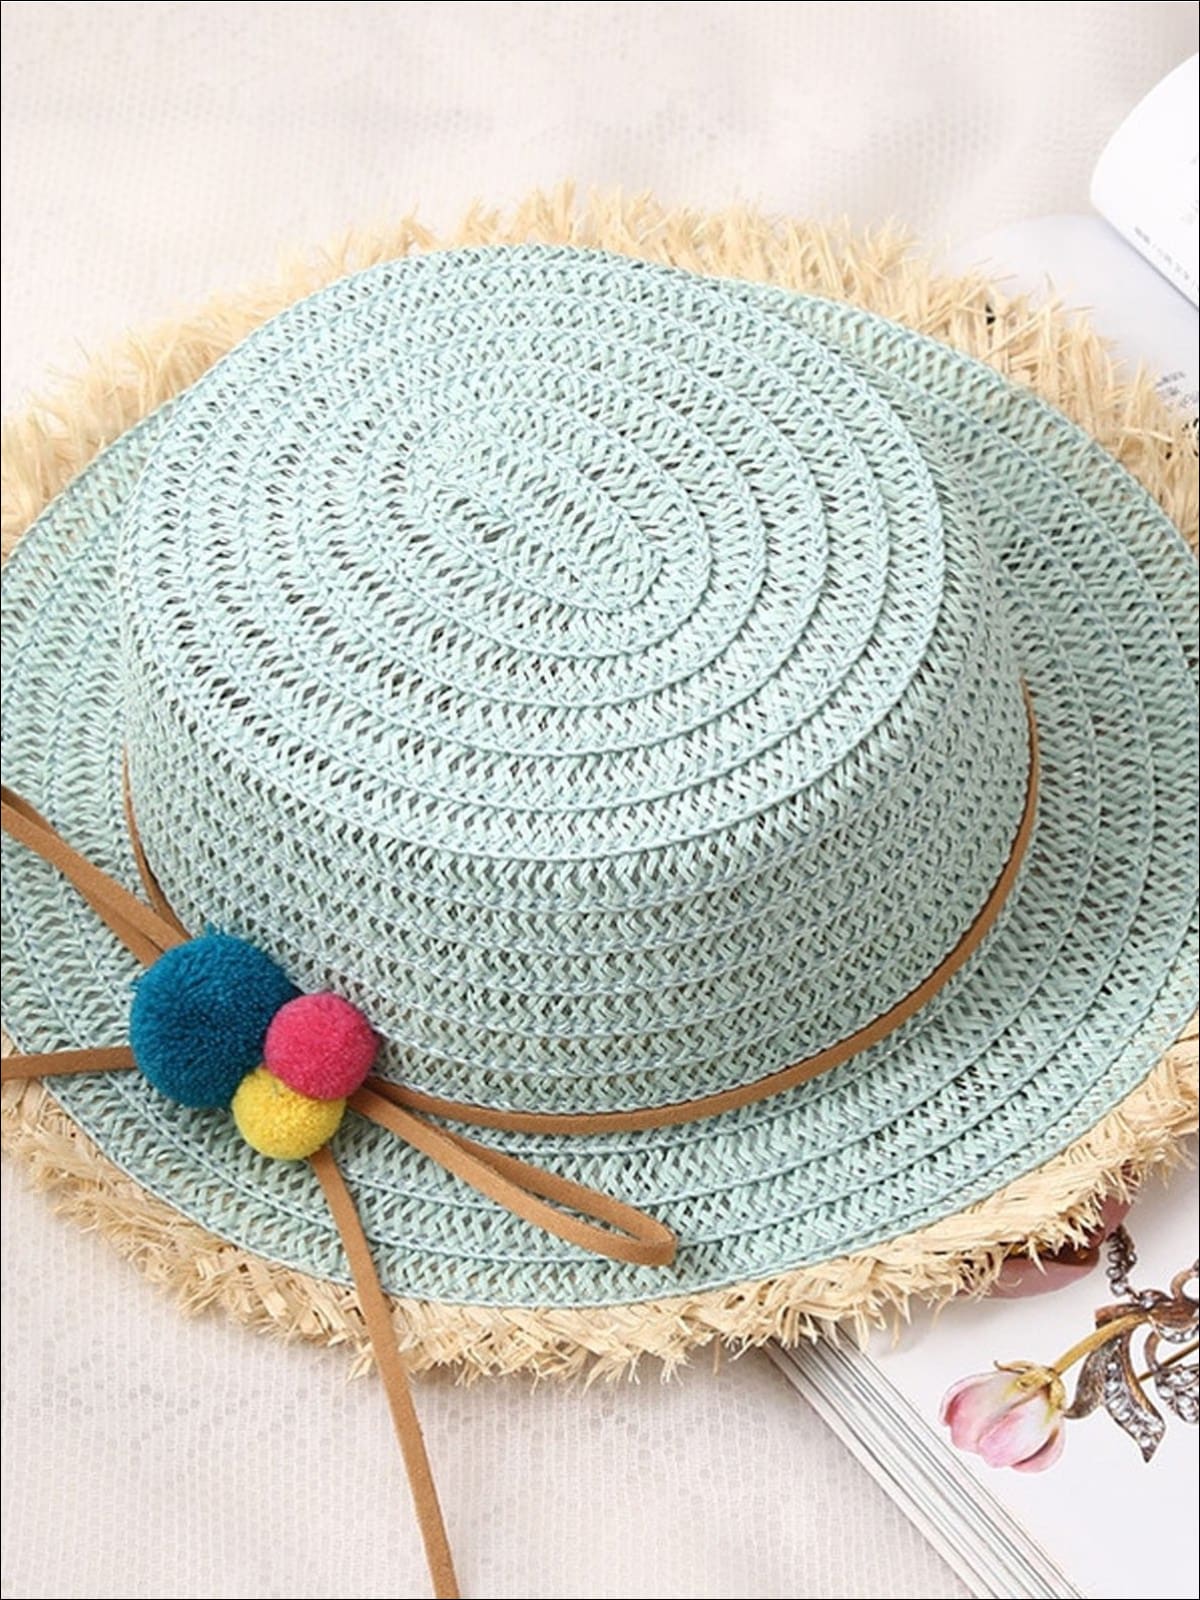 Girls Straw Hat with Leather Strap and Pom Poms - Mint - Girls Hats